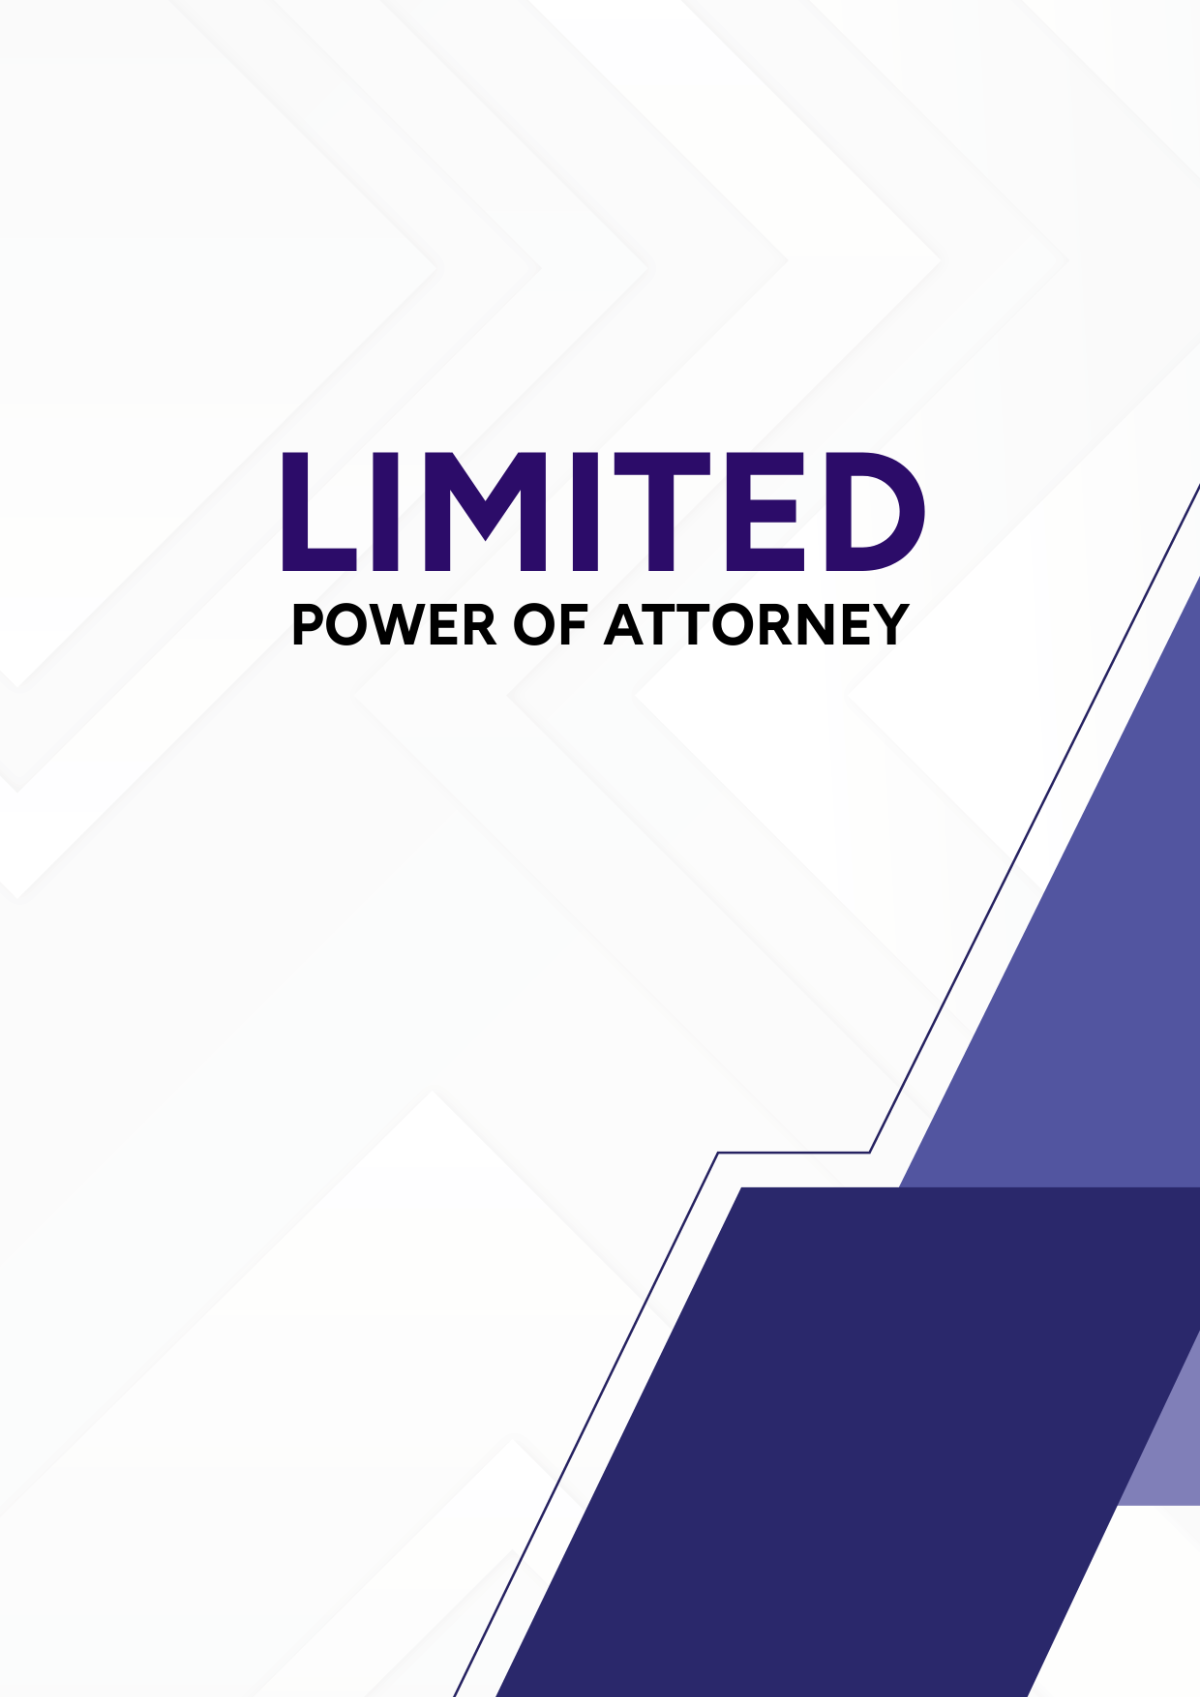 Free Limited Power of Attorney Template